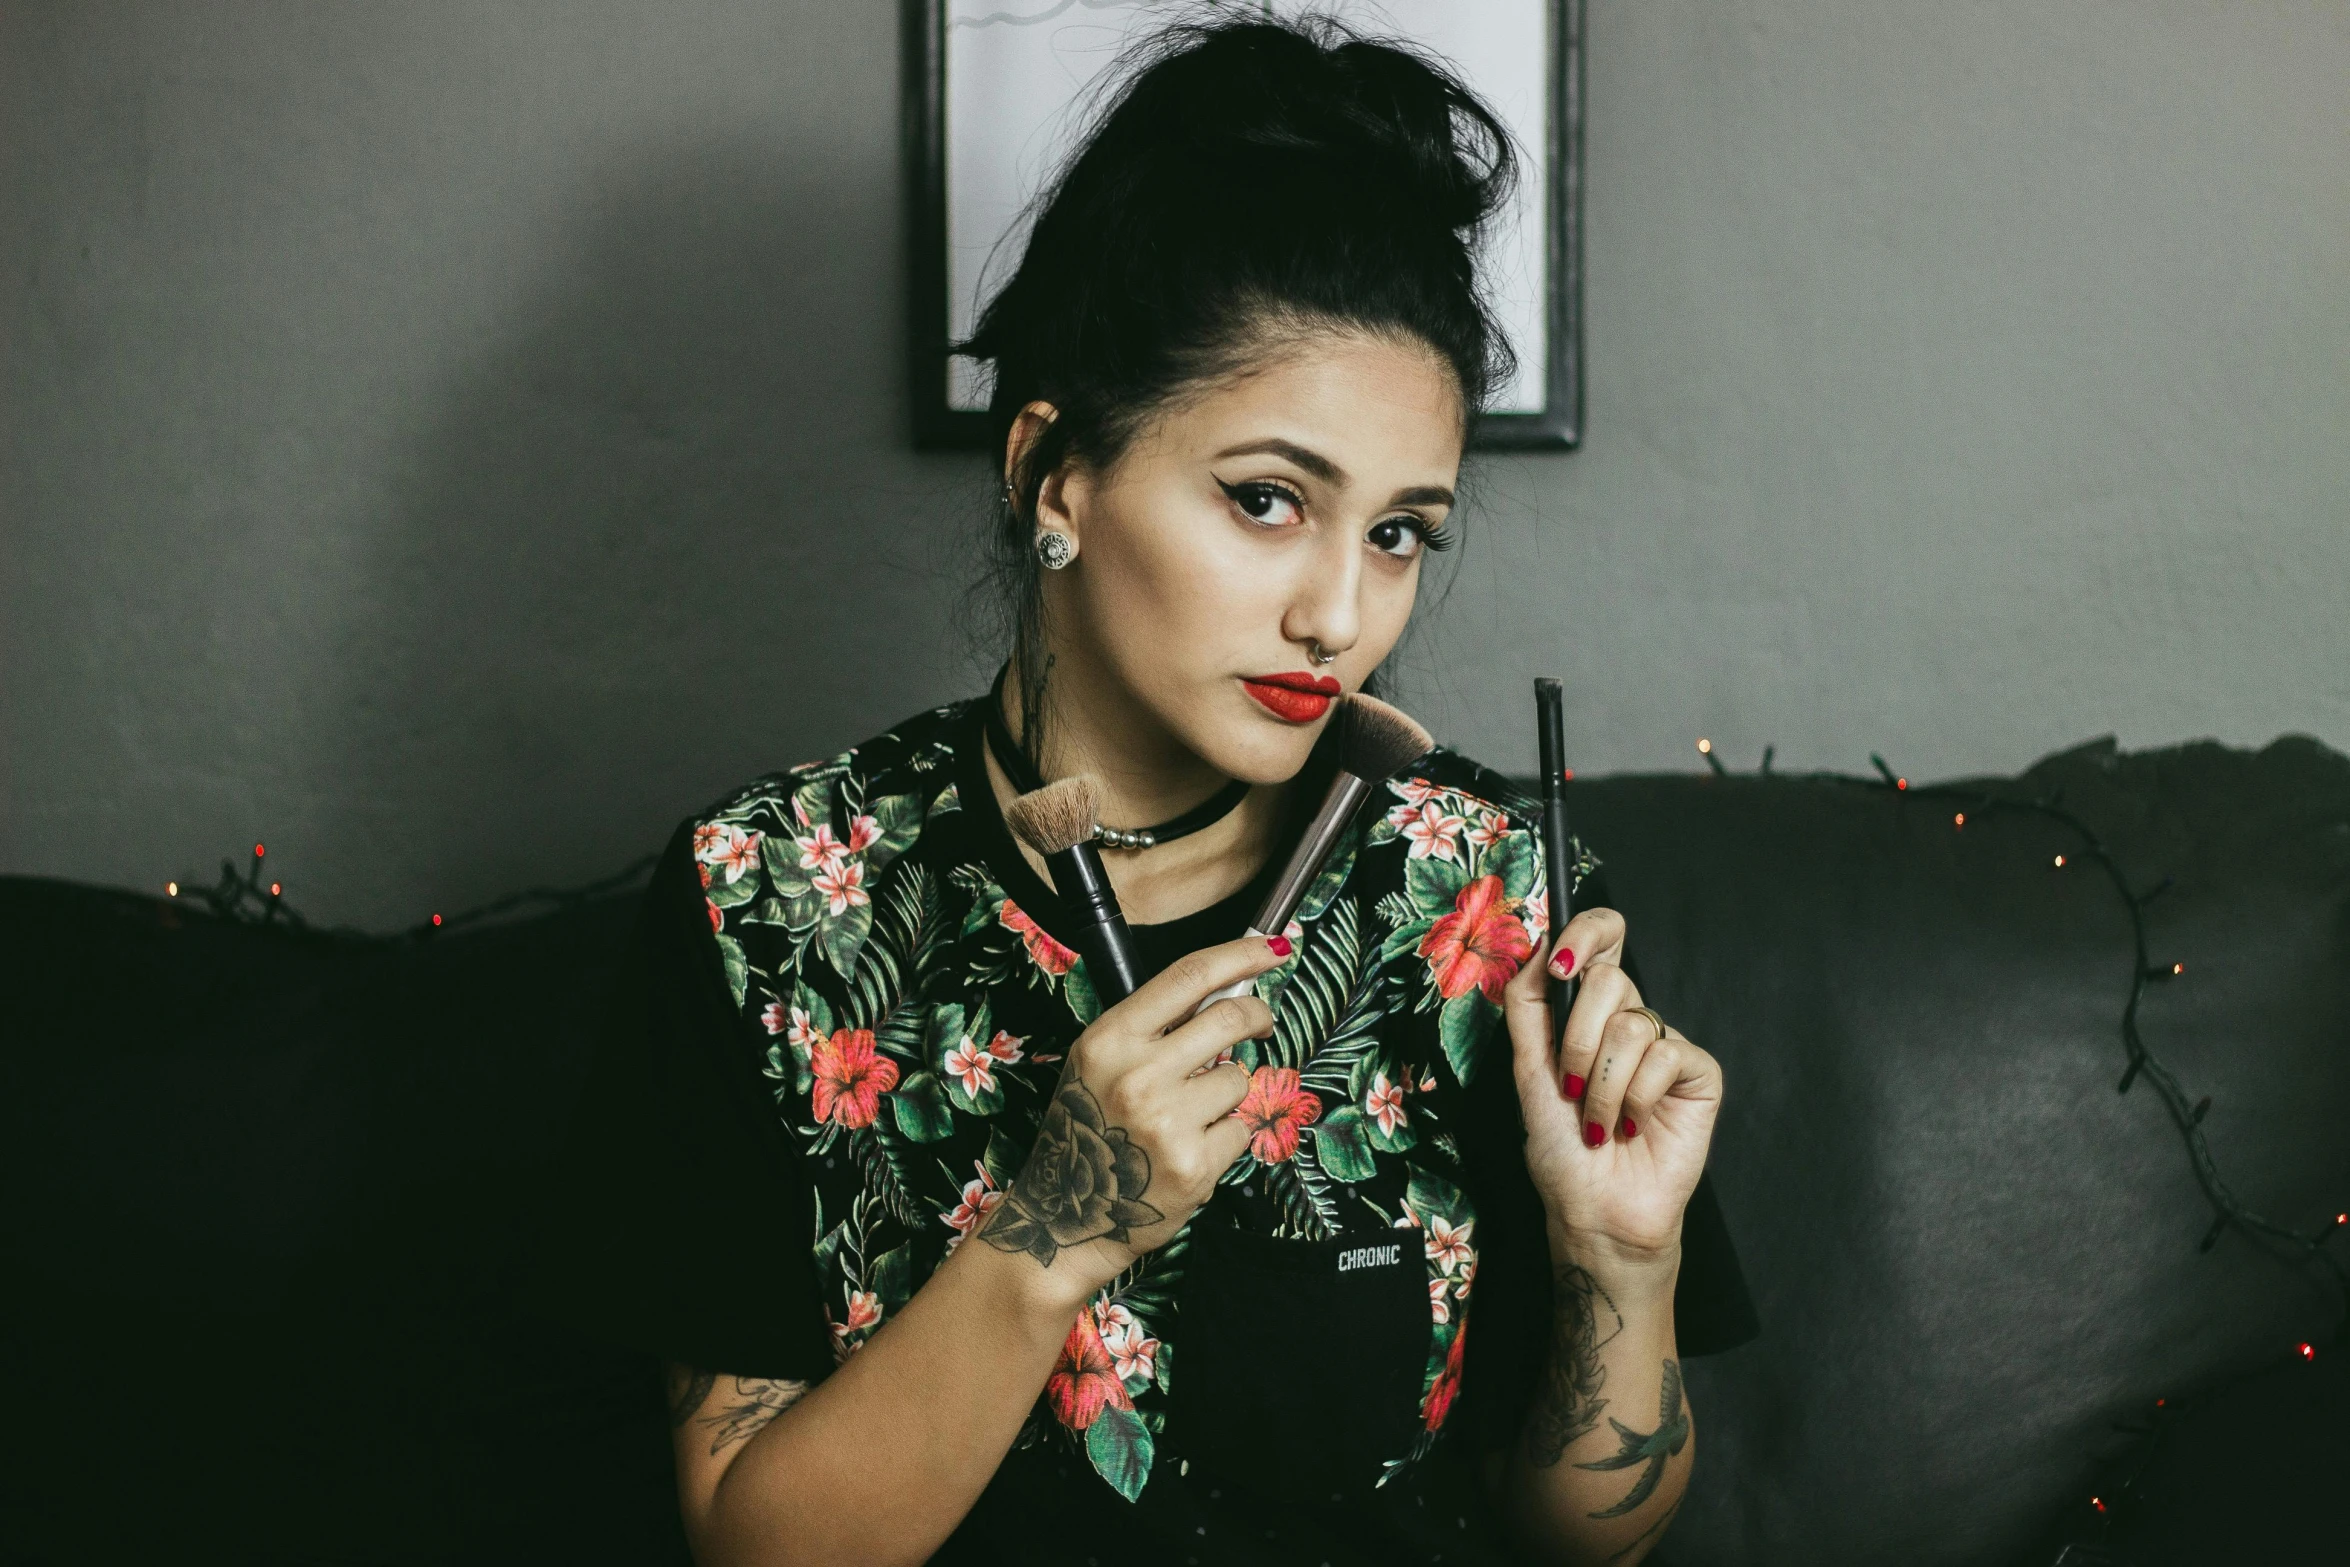 a woman sitting on a couch smoking a cigarette, a tattoo, trending on pexels, toyism, putting makeup on, floral, headshot profile picture, kyza saleem